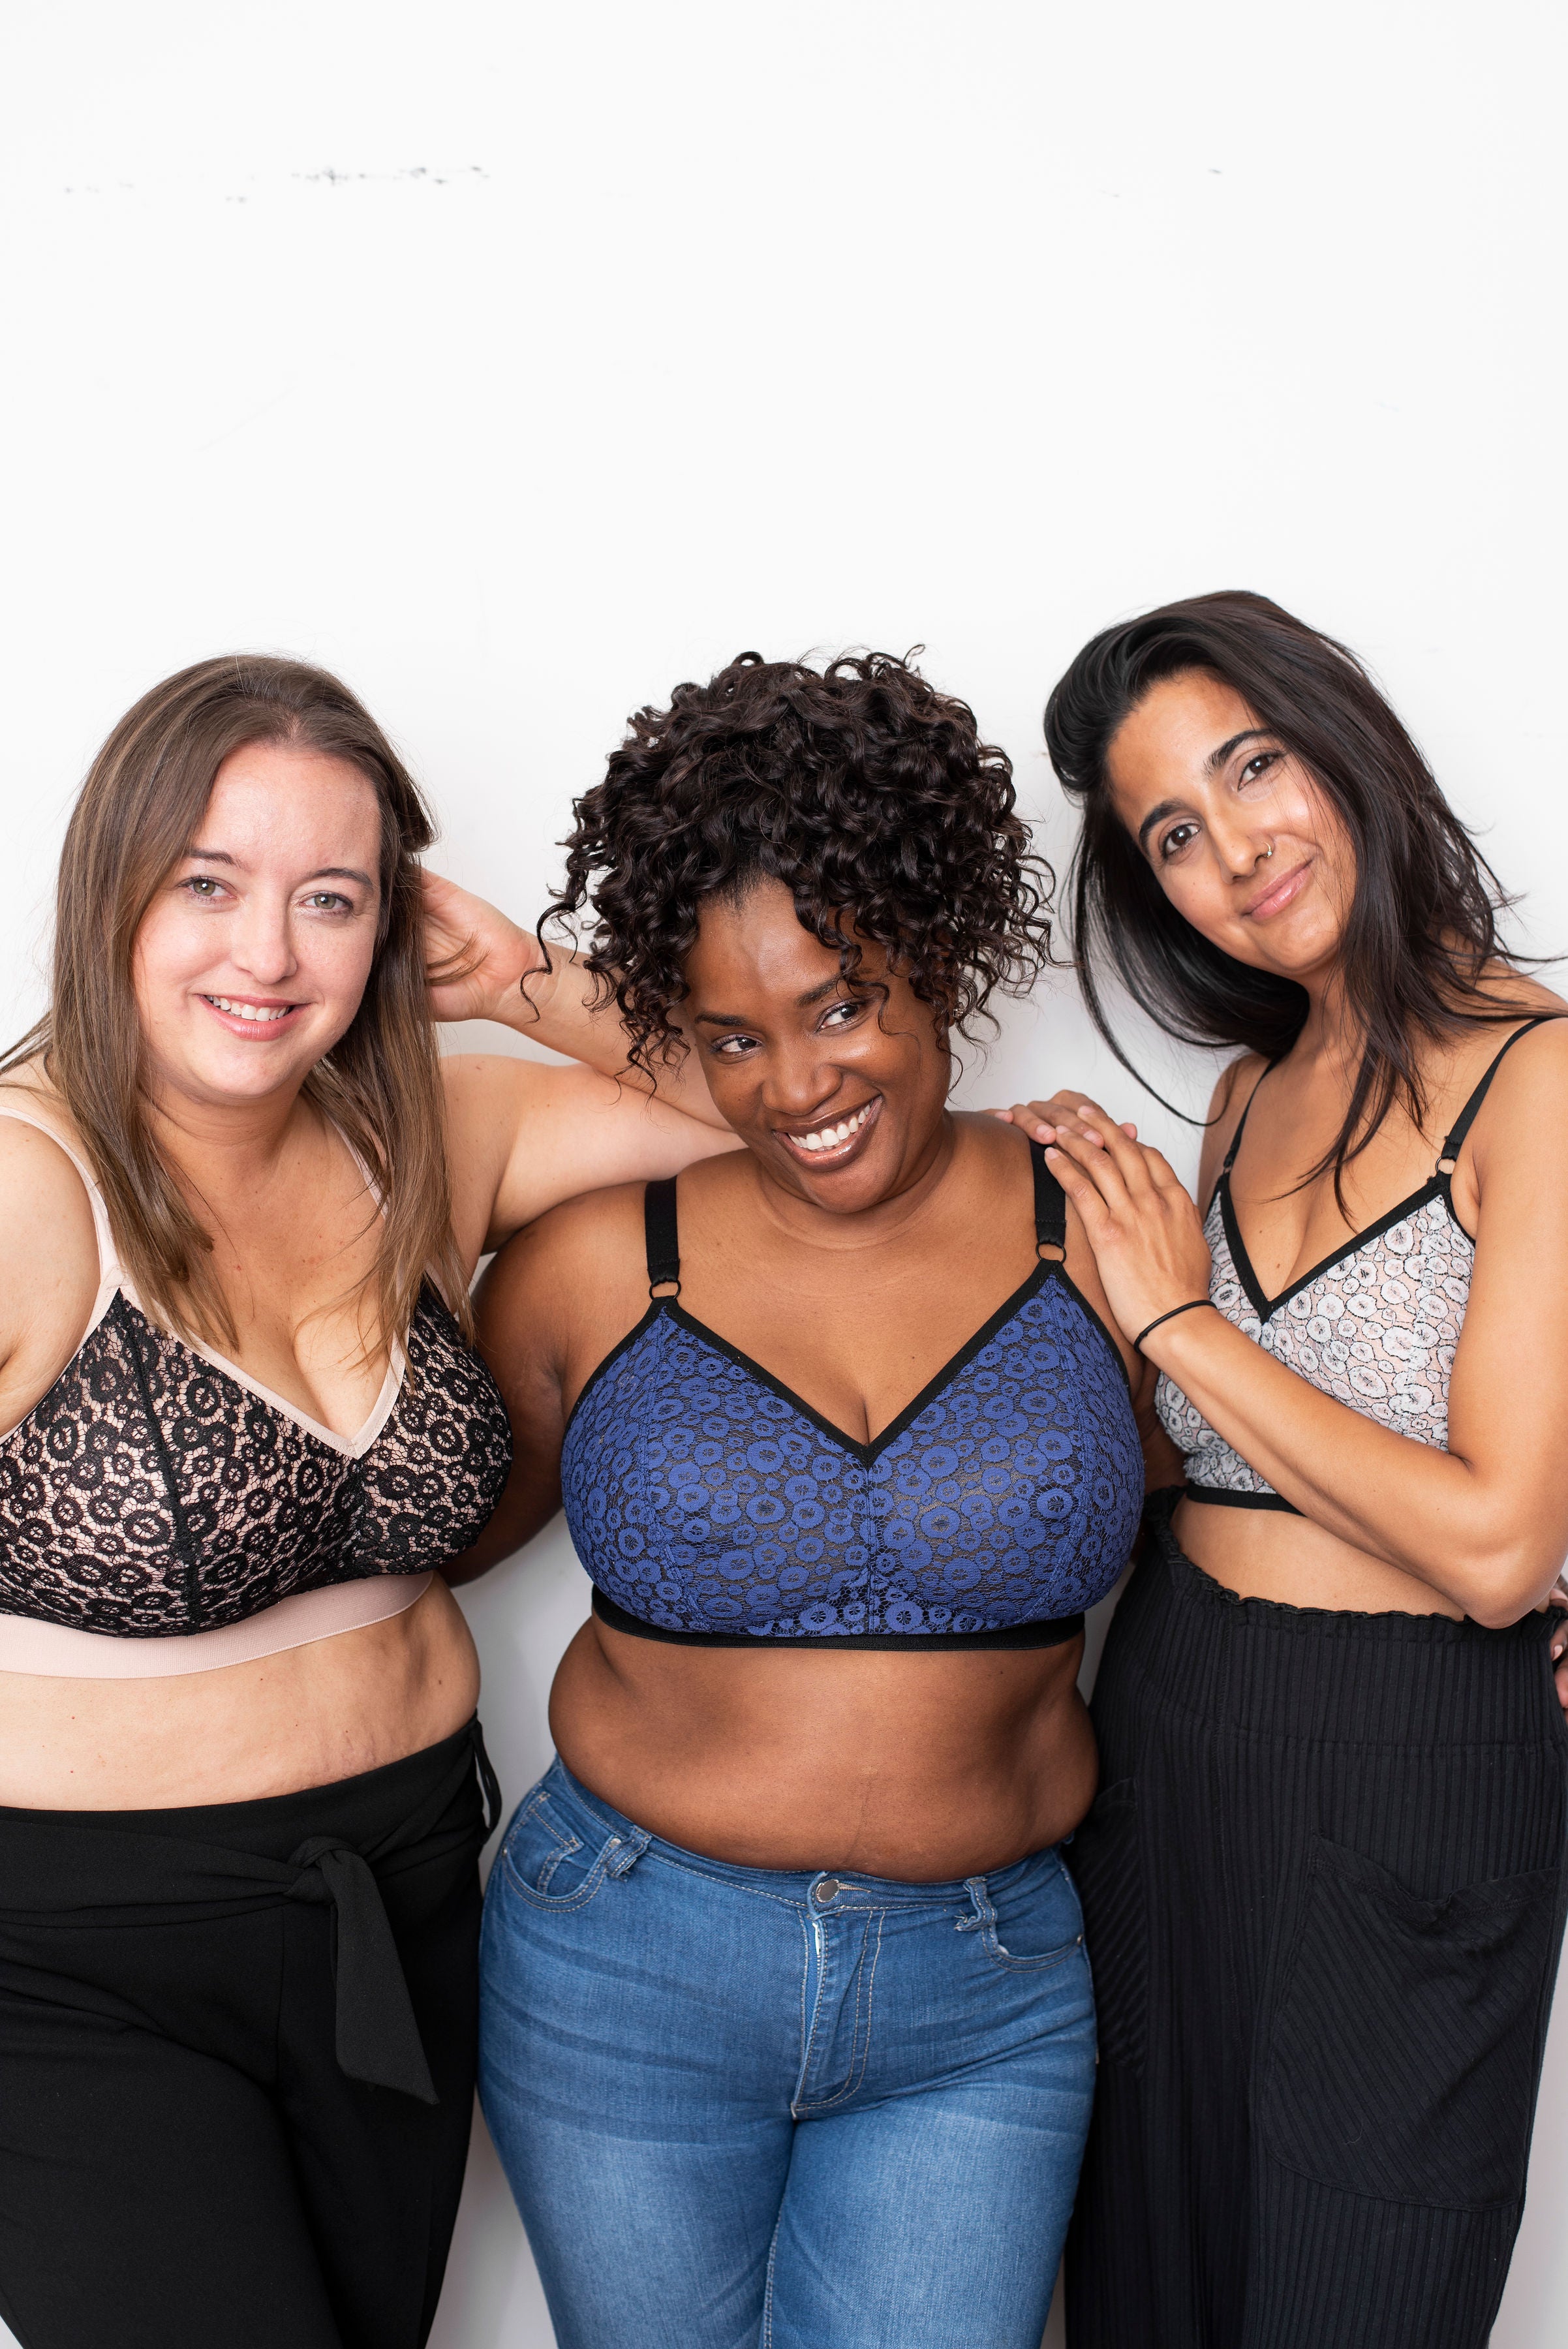 The Bralette: What are they and who they are made for